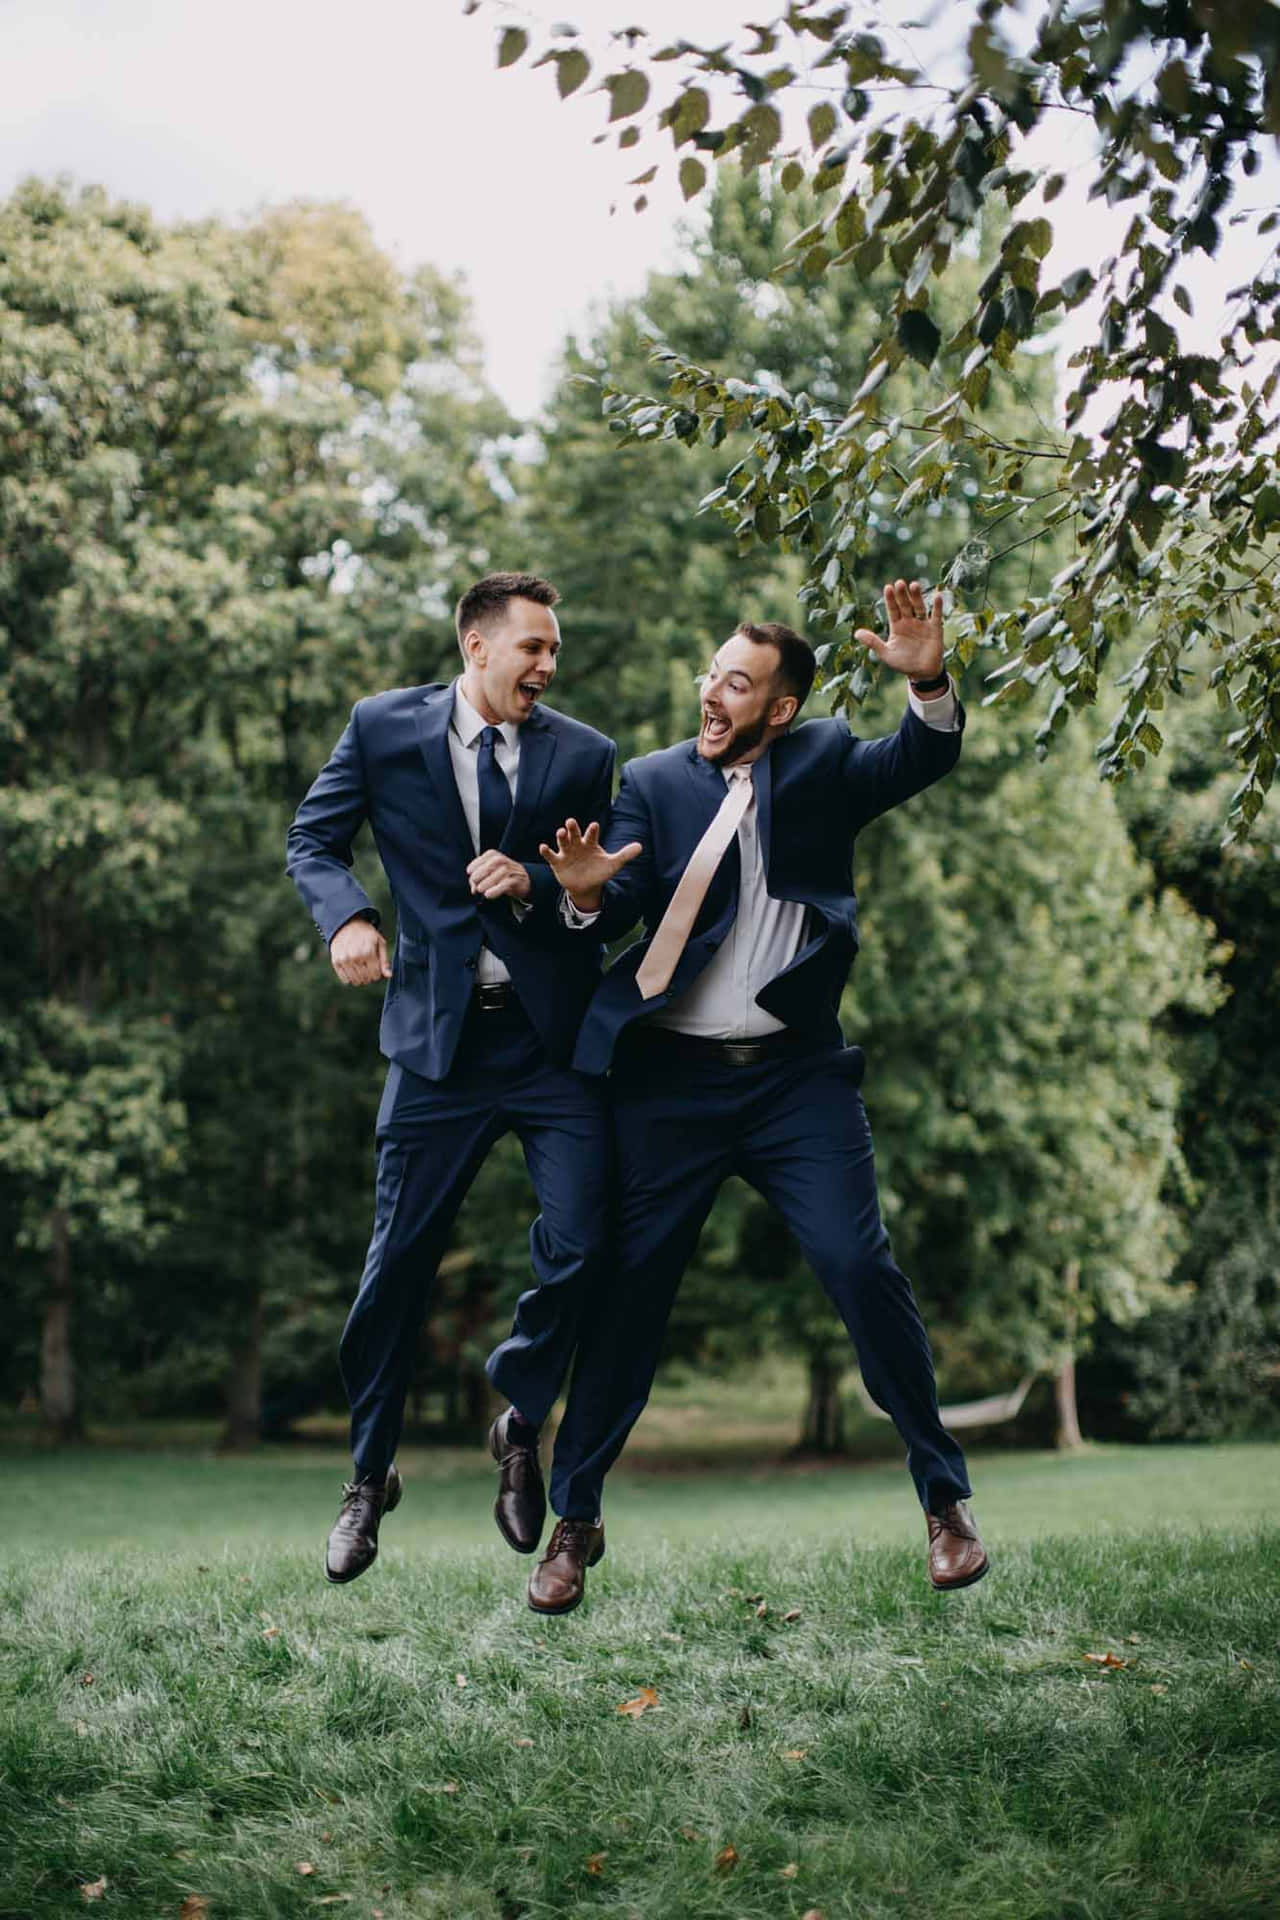 Two Groomsmen Jumping In The Air In A Park